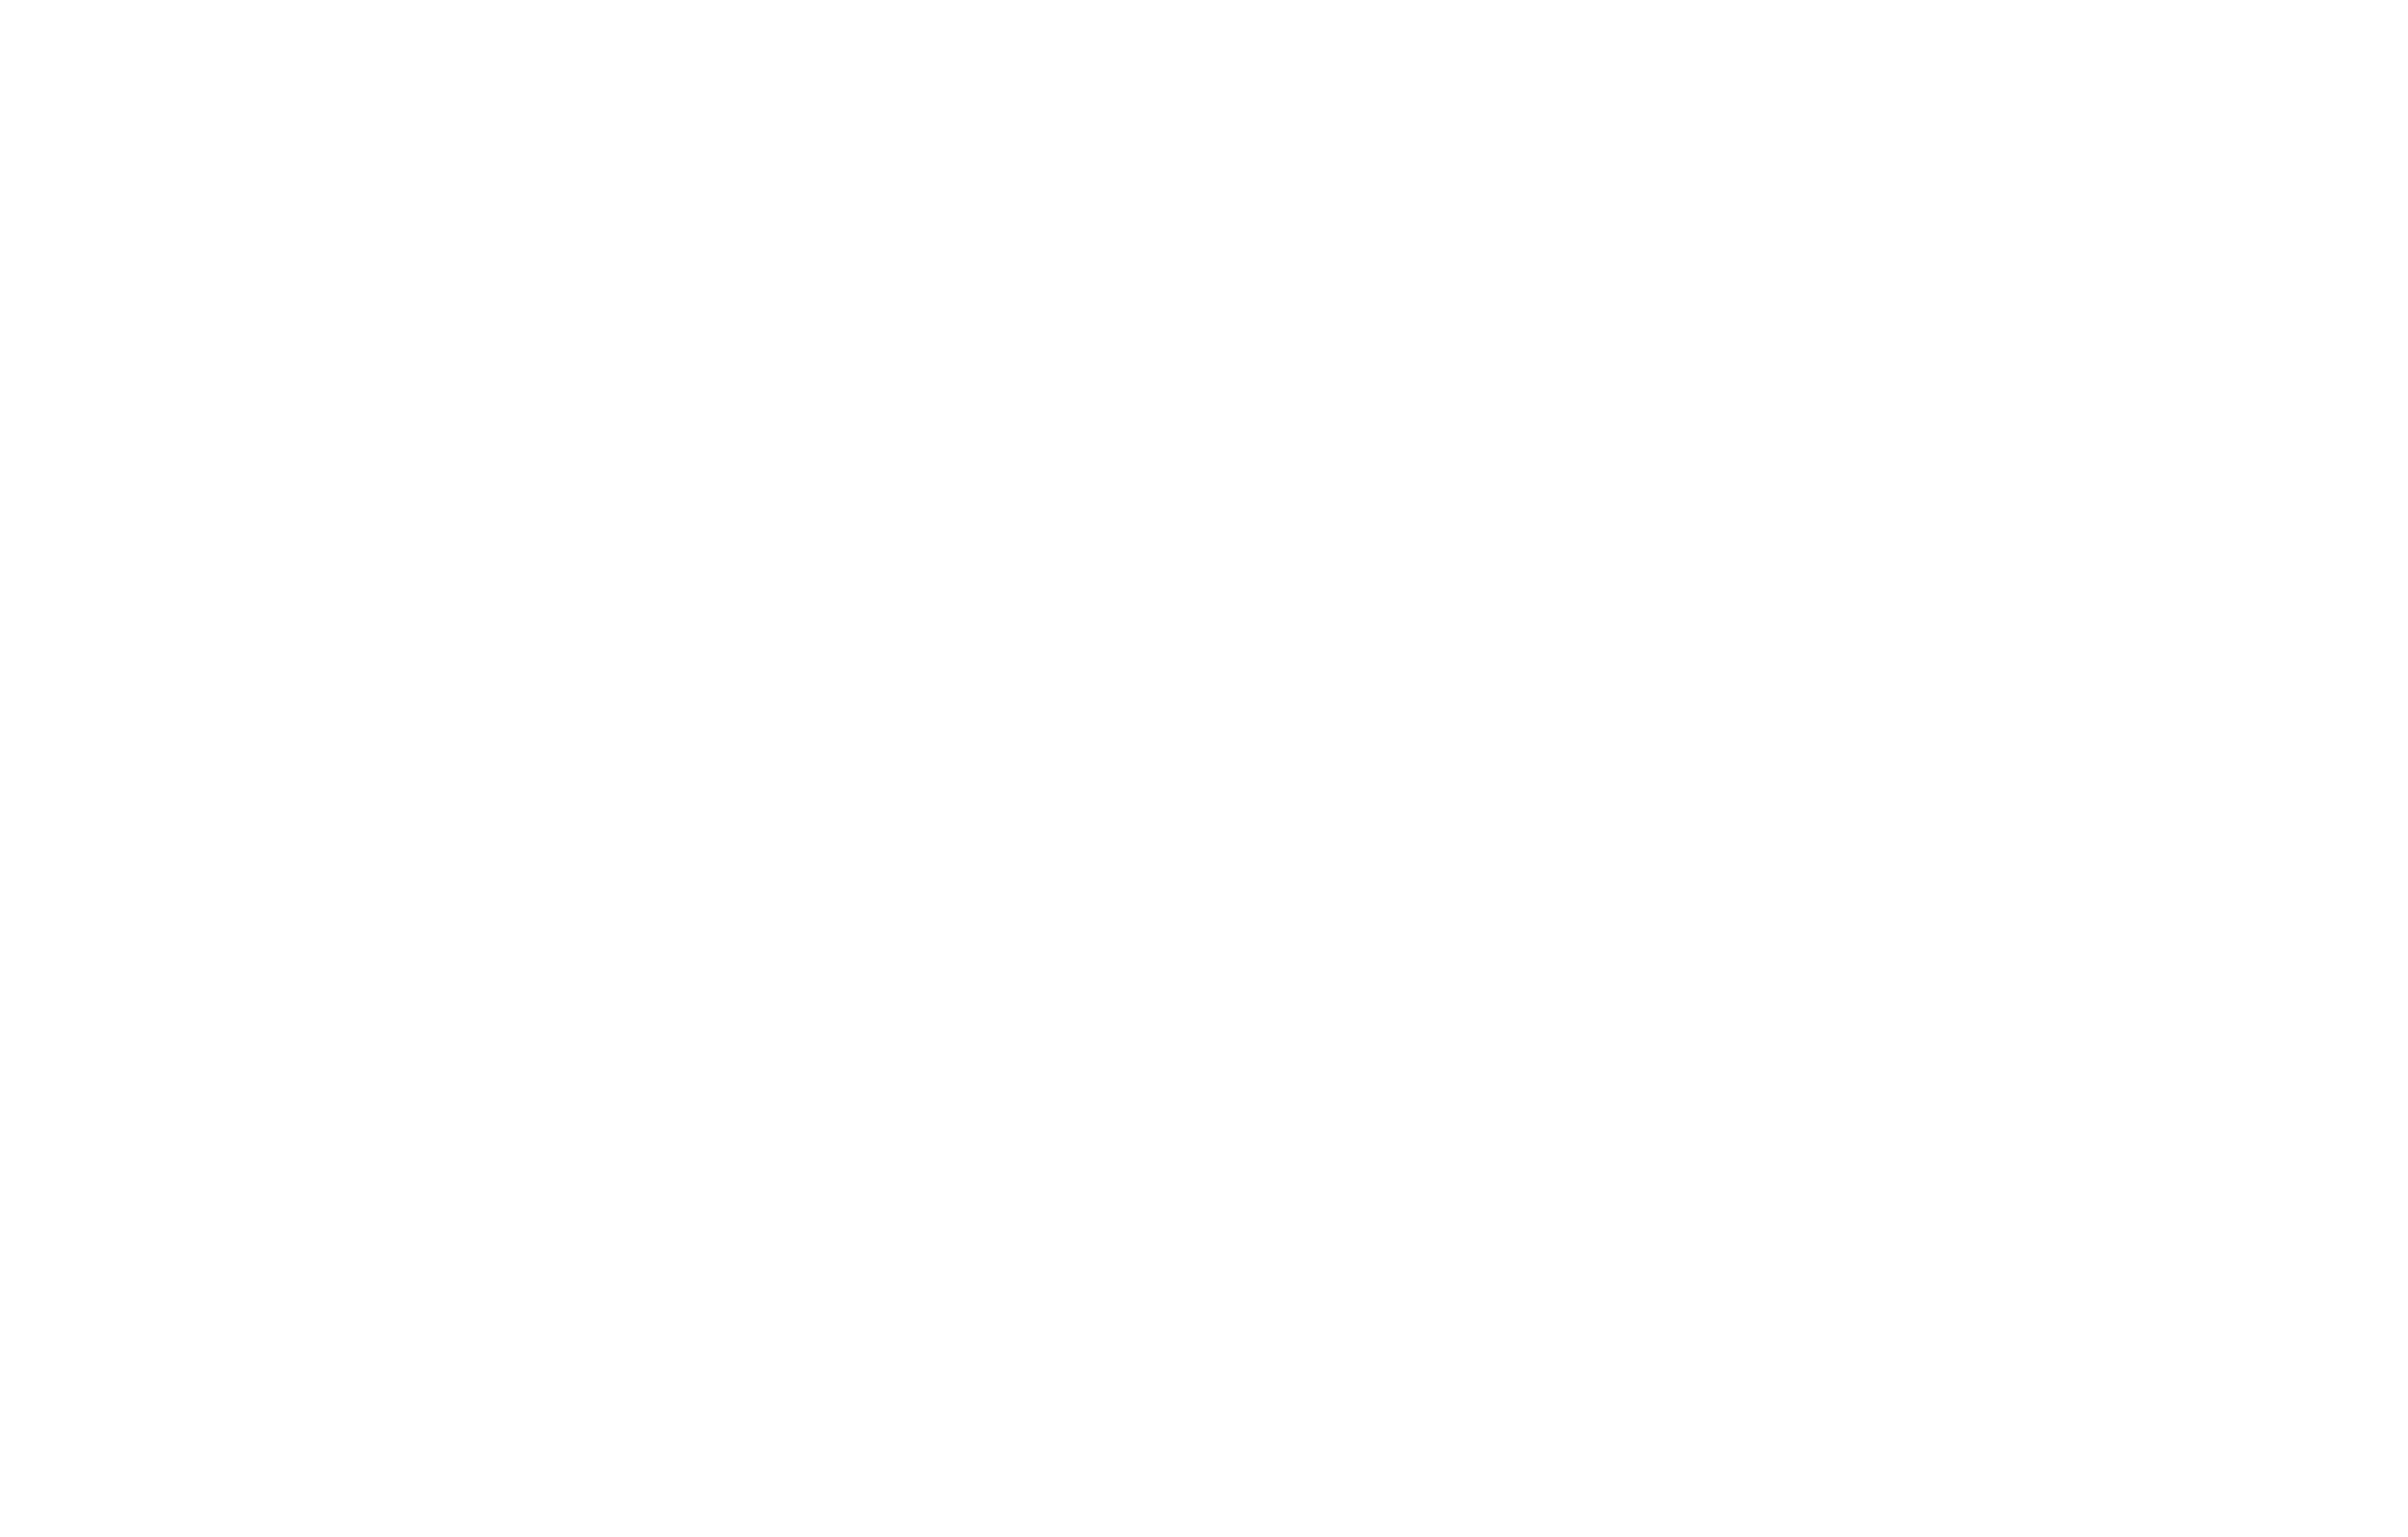 4-exp-luxury-collections-white-copy300x.png